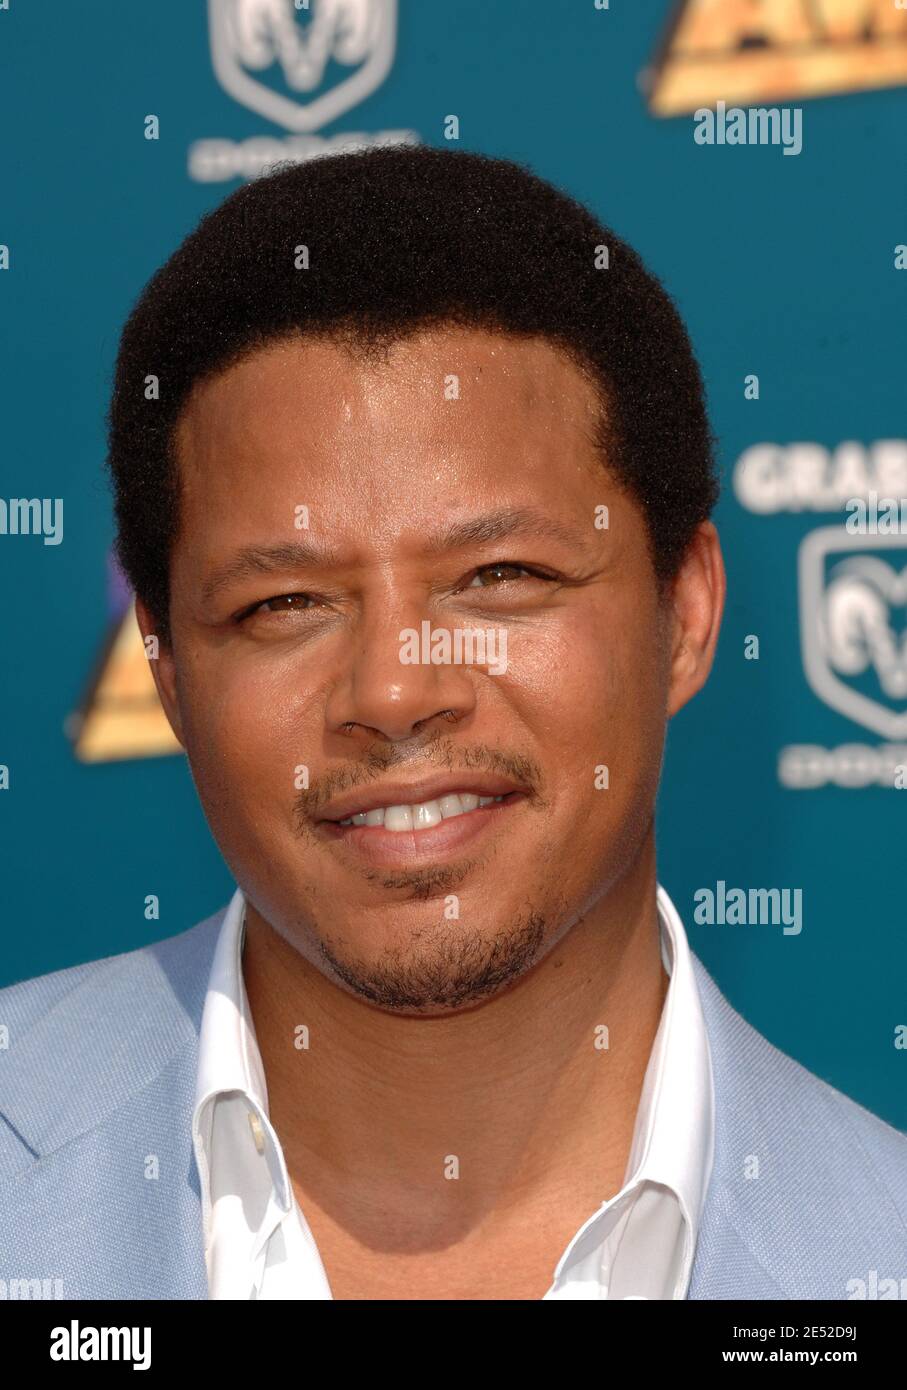 Terrence Howard arriving for the 2008 BET Awards held at the Shrine Auditorium in Los Angeles, CA, USA on June 24, 2008. Photo by Lionel Hahn/ABACAPRESS.COM Stock Photo